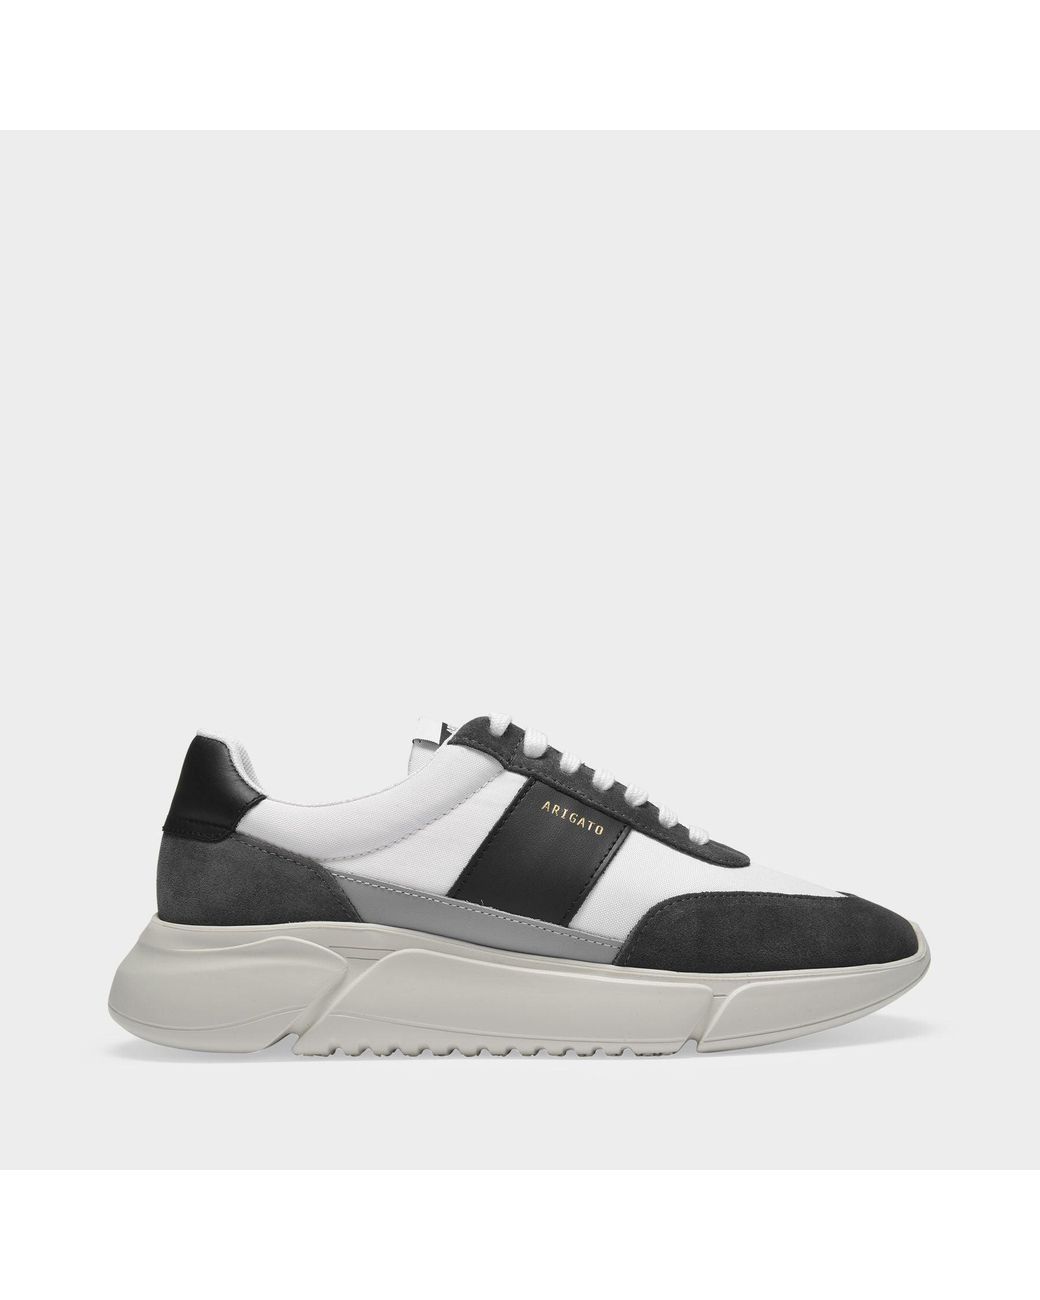 Axel Arigato Leather Genesis Vintage Runner Baskets for Men | Lyst Canada